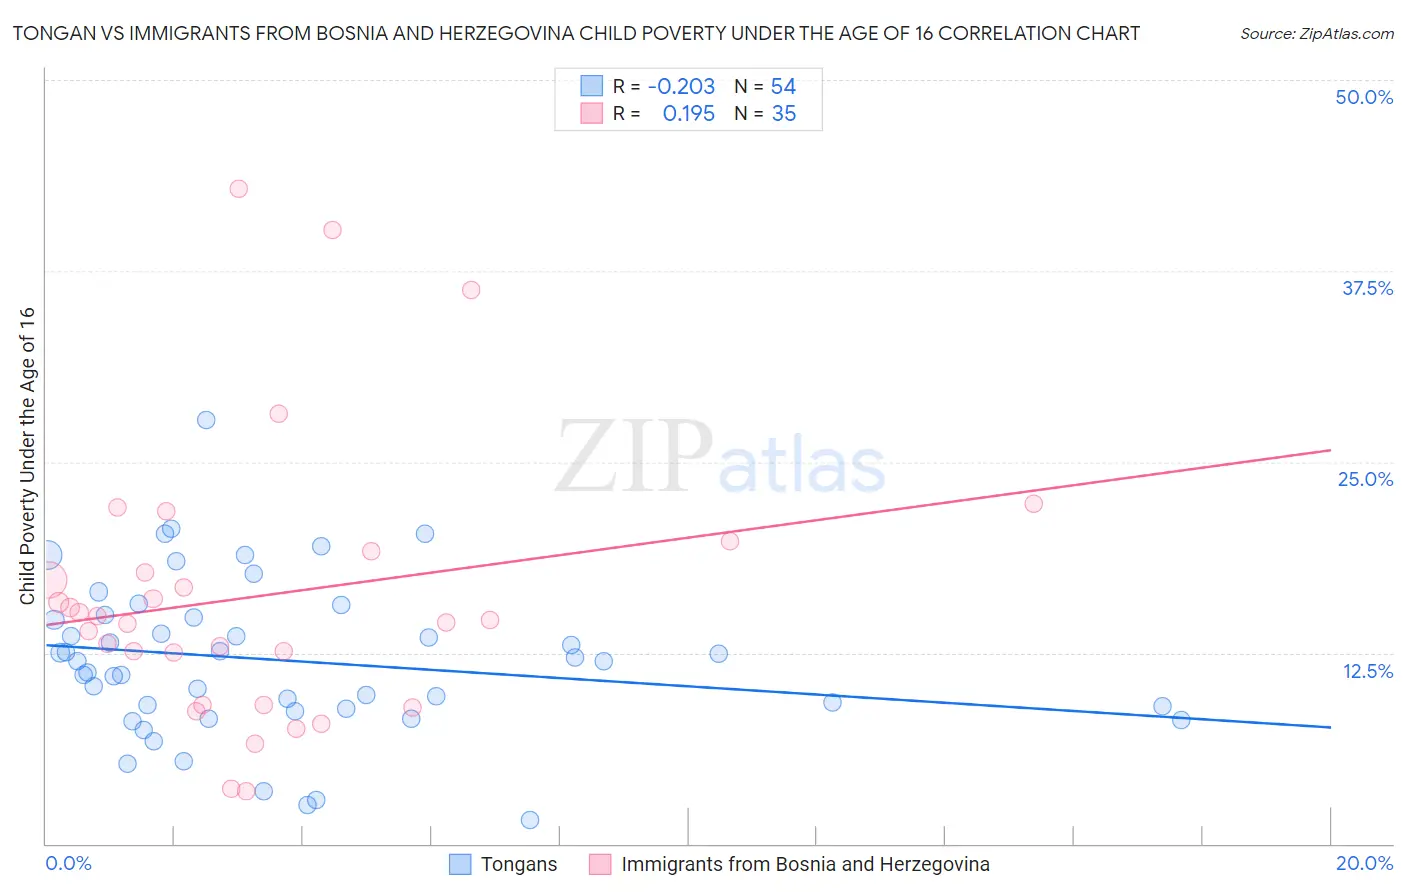 Tongan vs Immigrants from Bosnia and Herzegovina Child Poverty Under the Age of 16